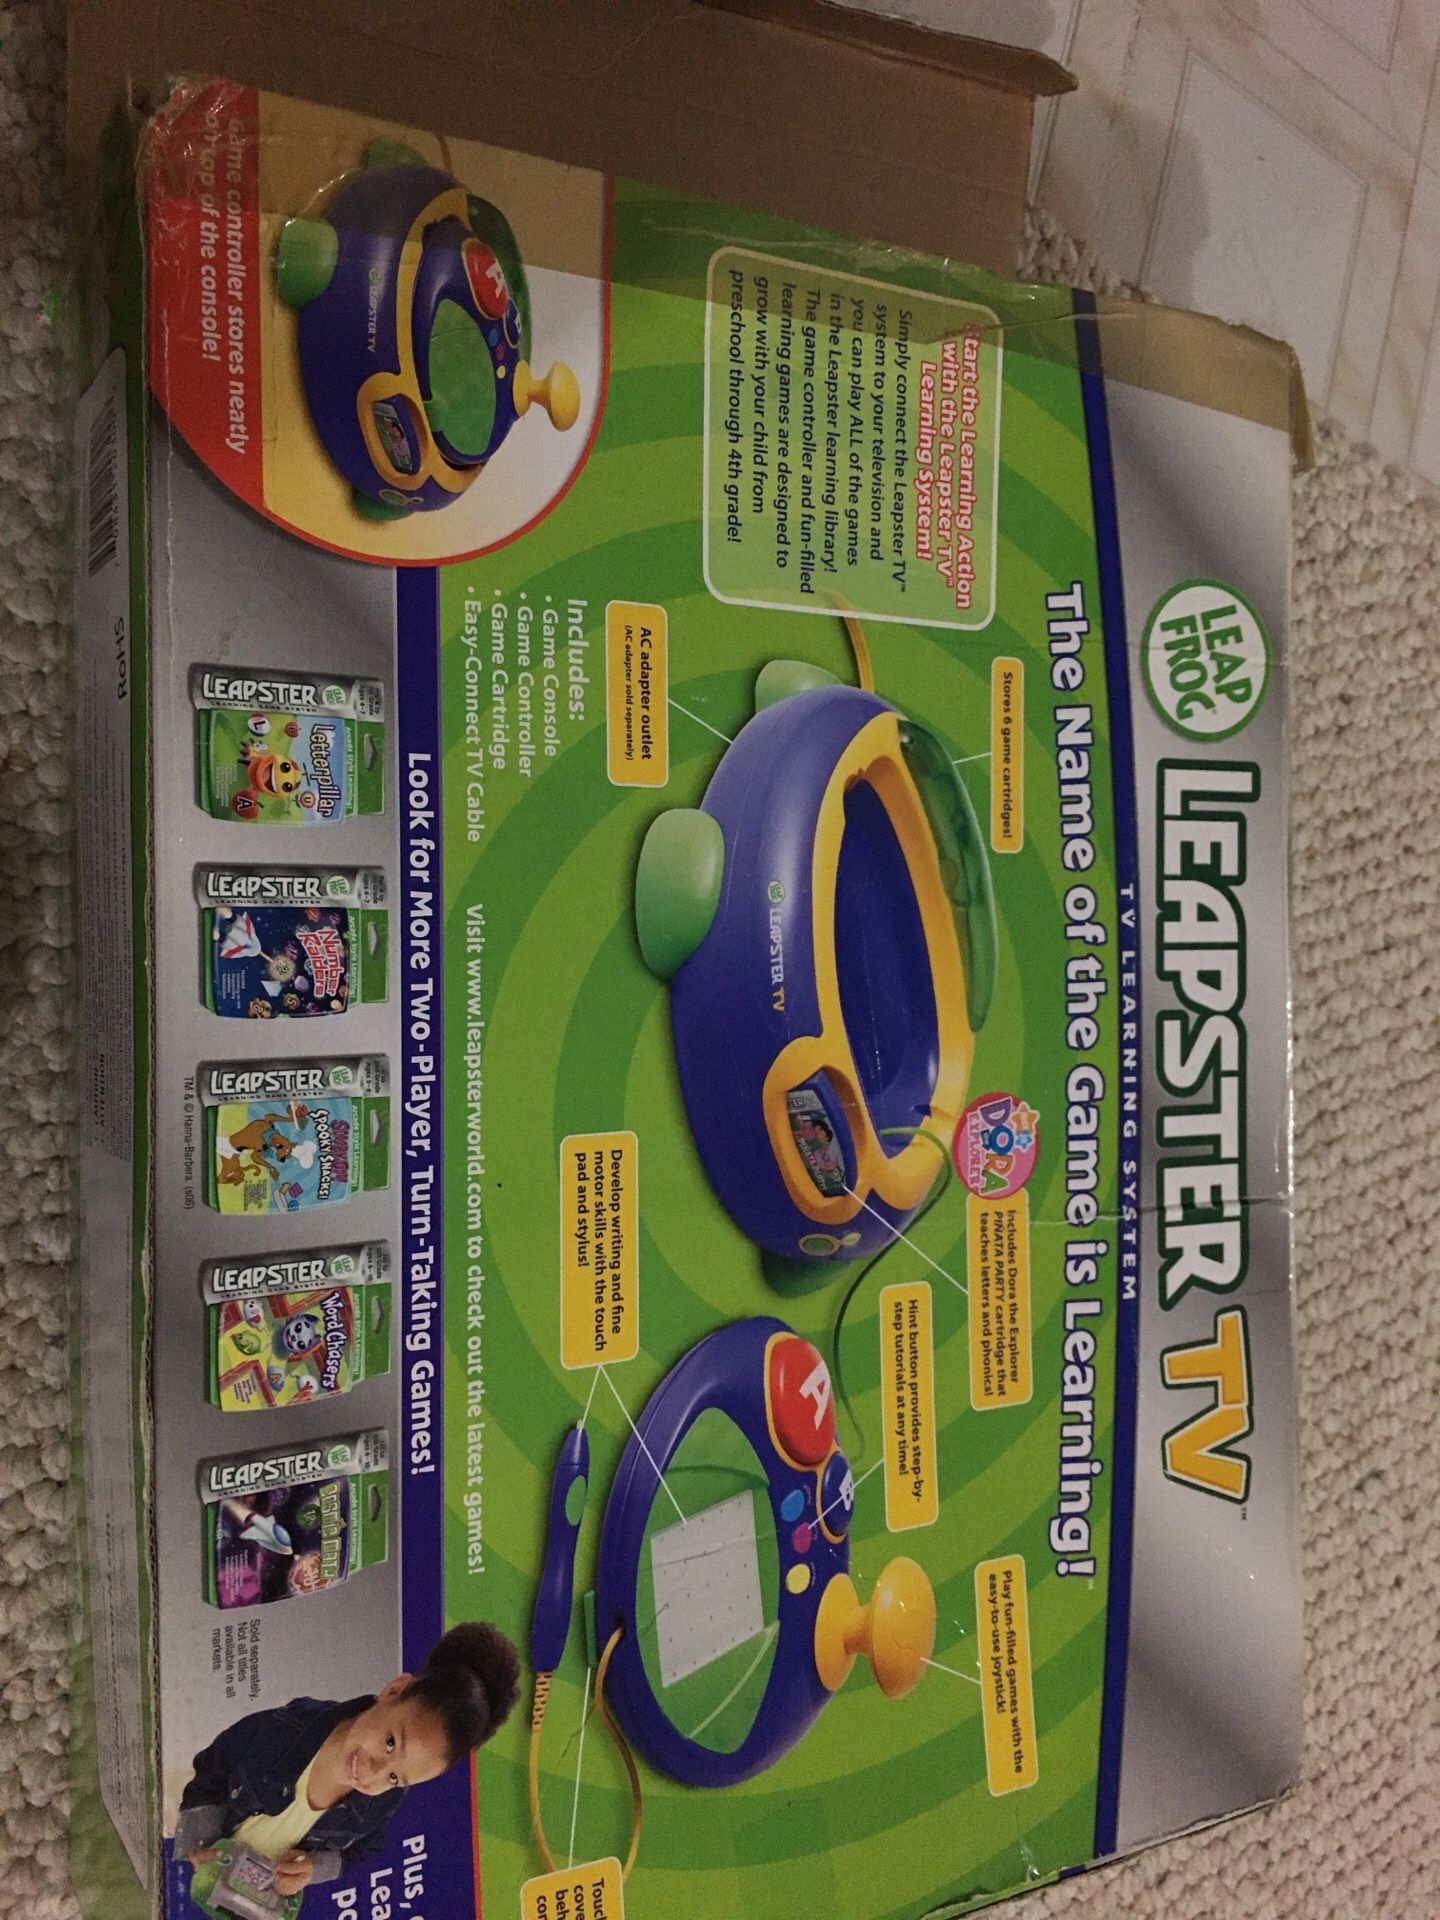 Leapster tv kids game console